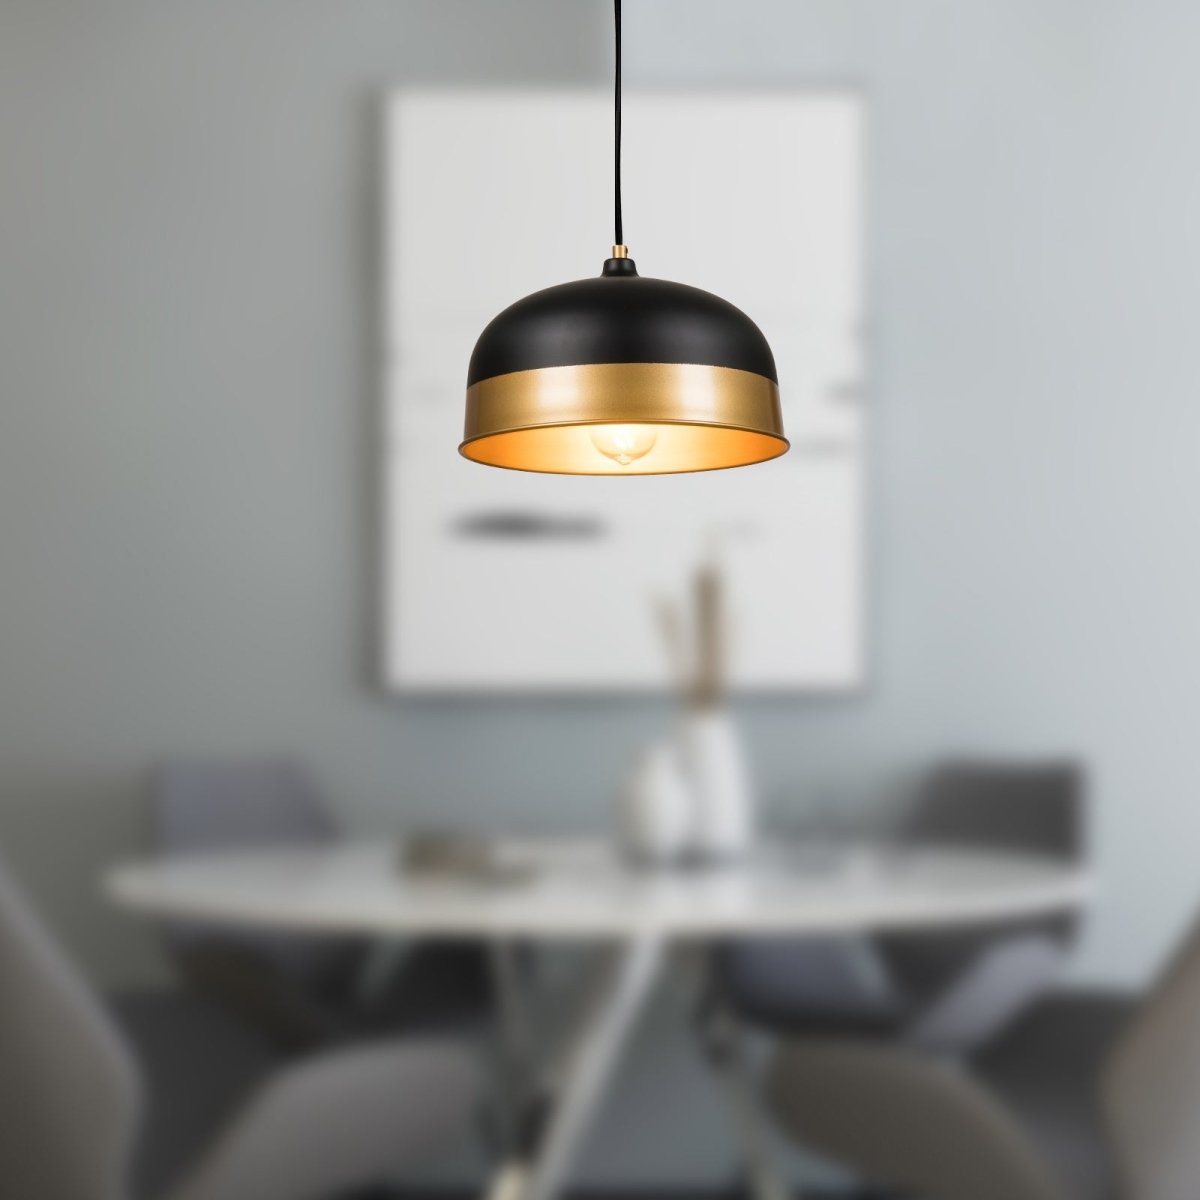 ExBrite Pendant Small Black and Gold 74.8“ Height Pendant Light